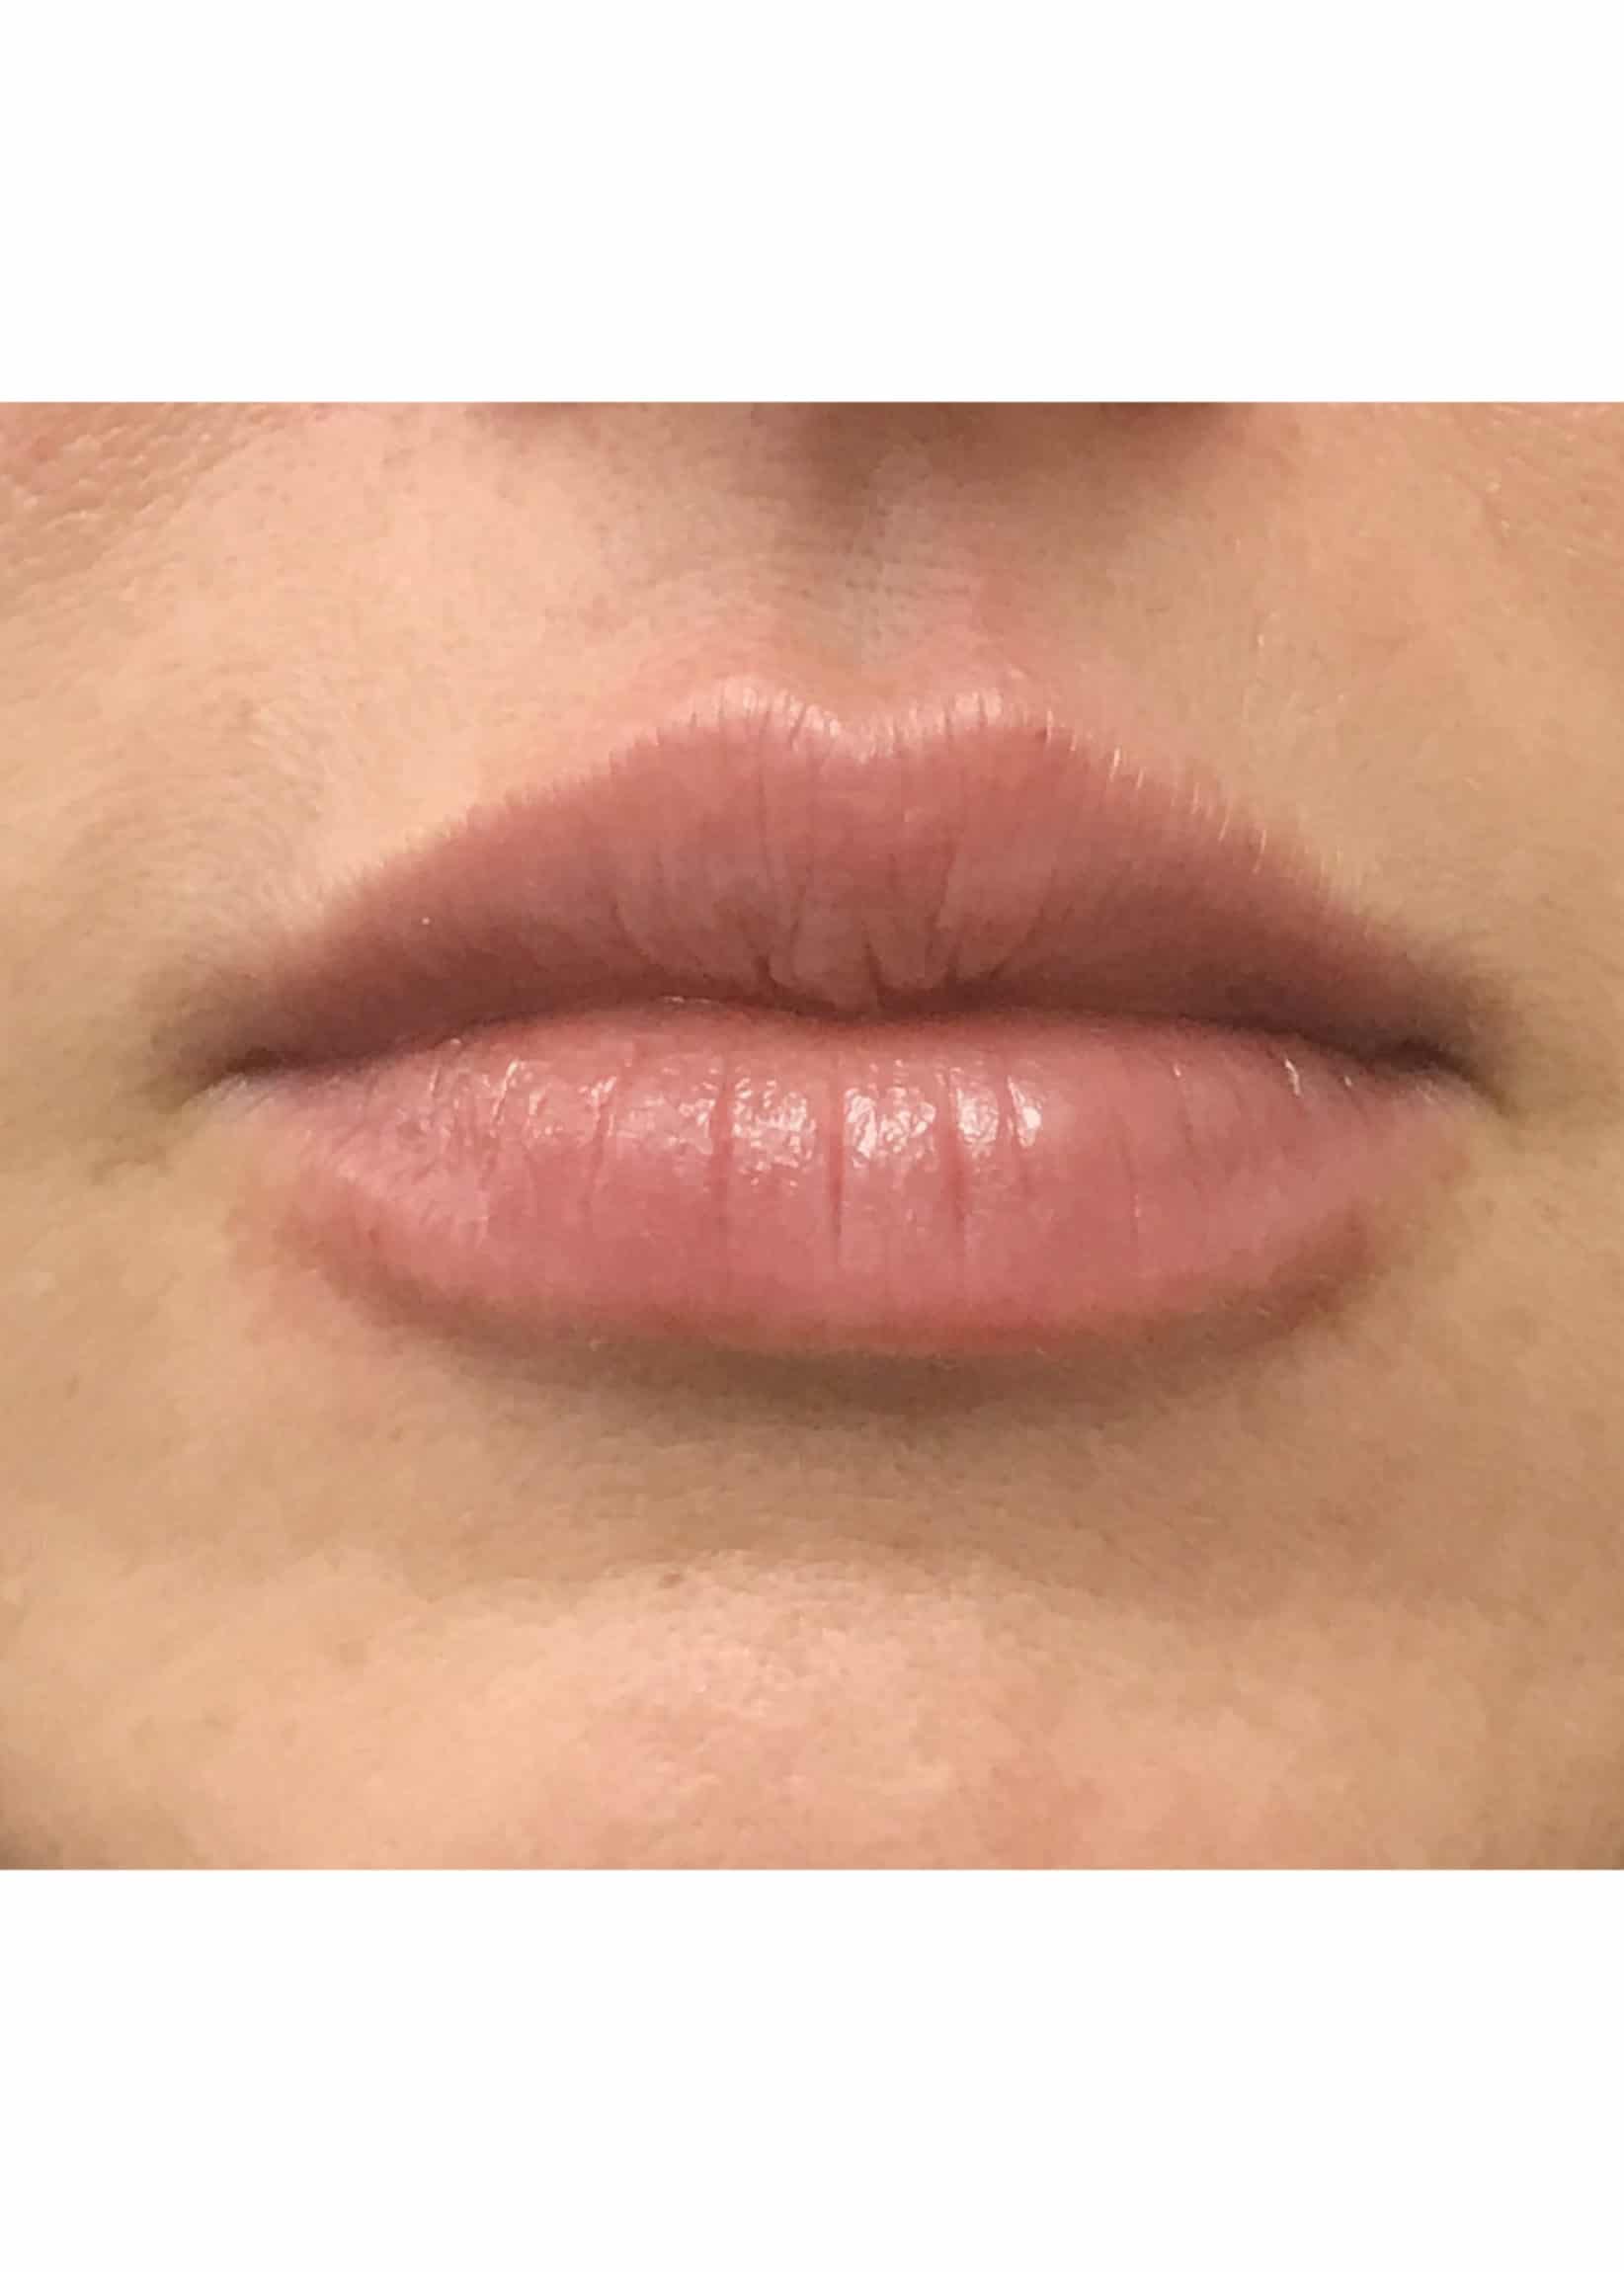 TheSkinCenter ProviderPages AngieKyne LipFiller After 2 scaled 1